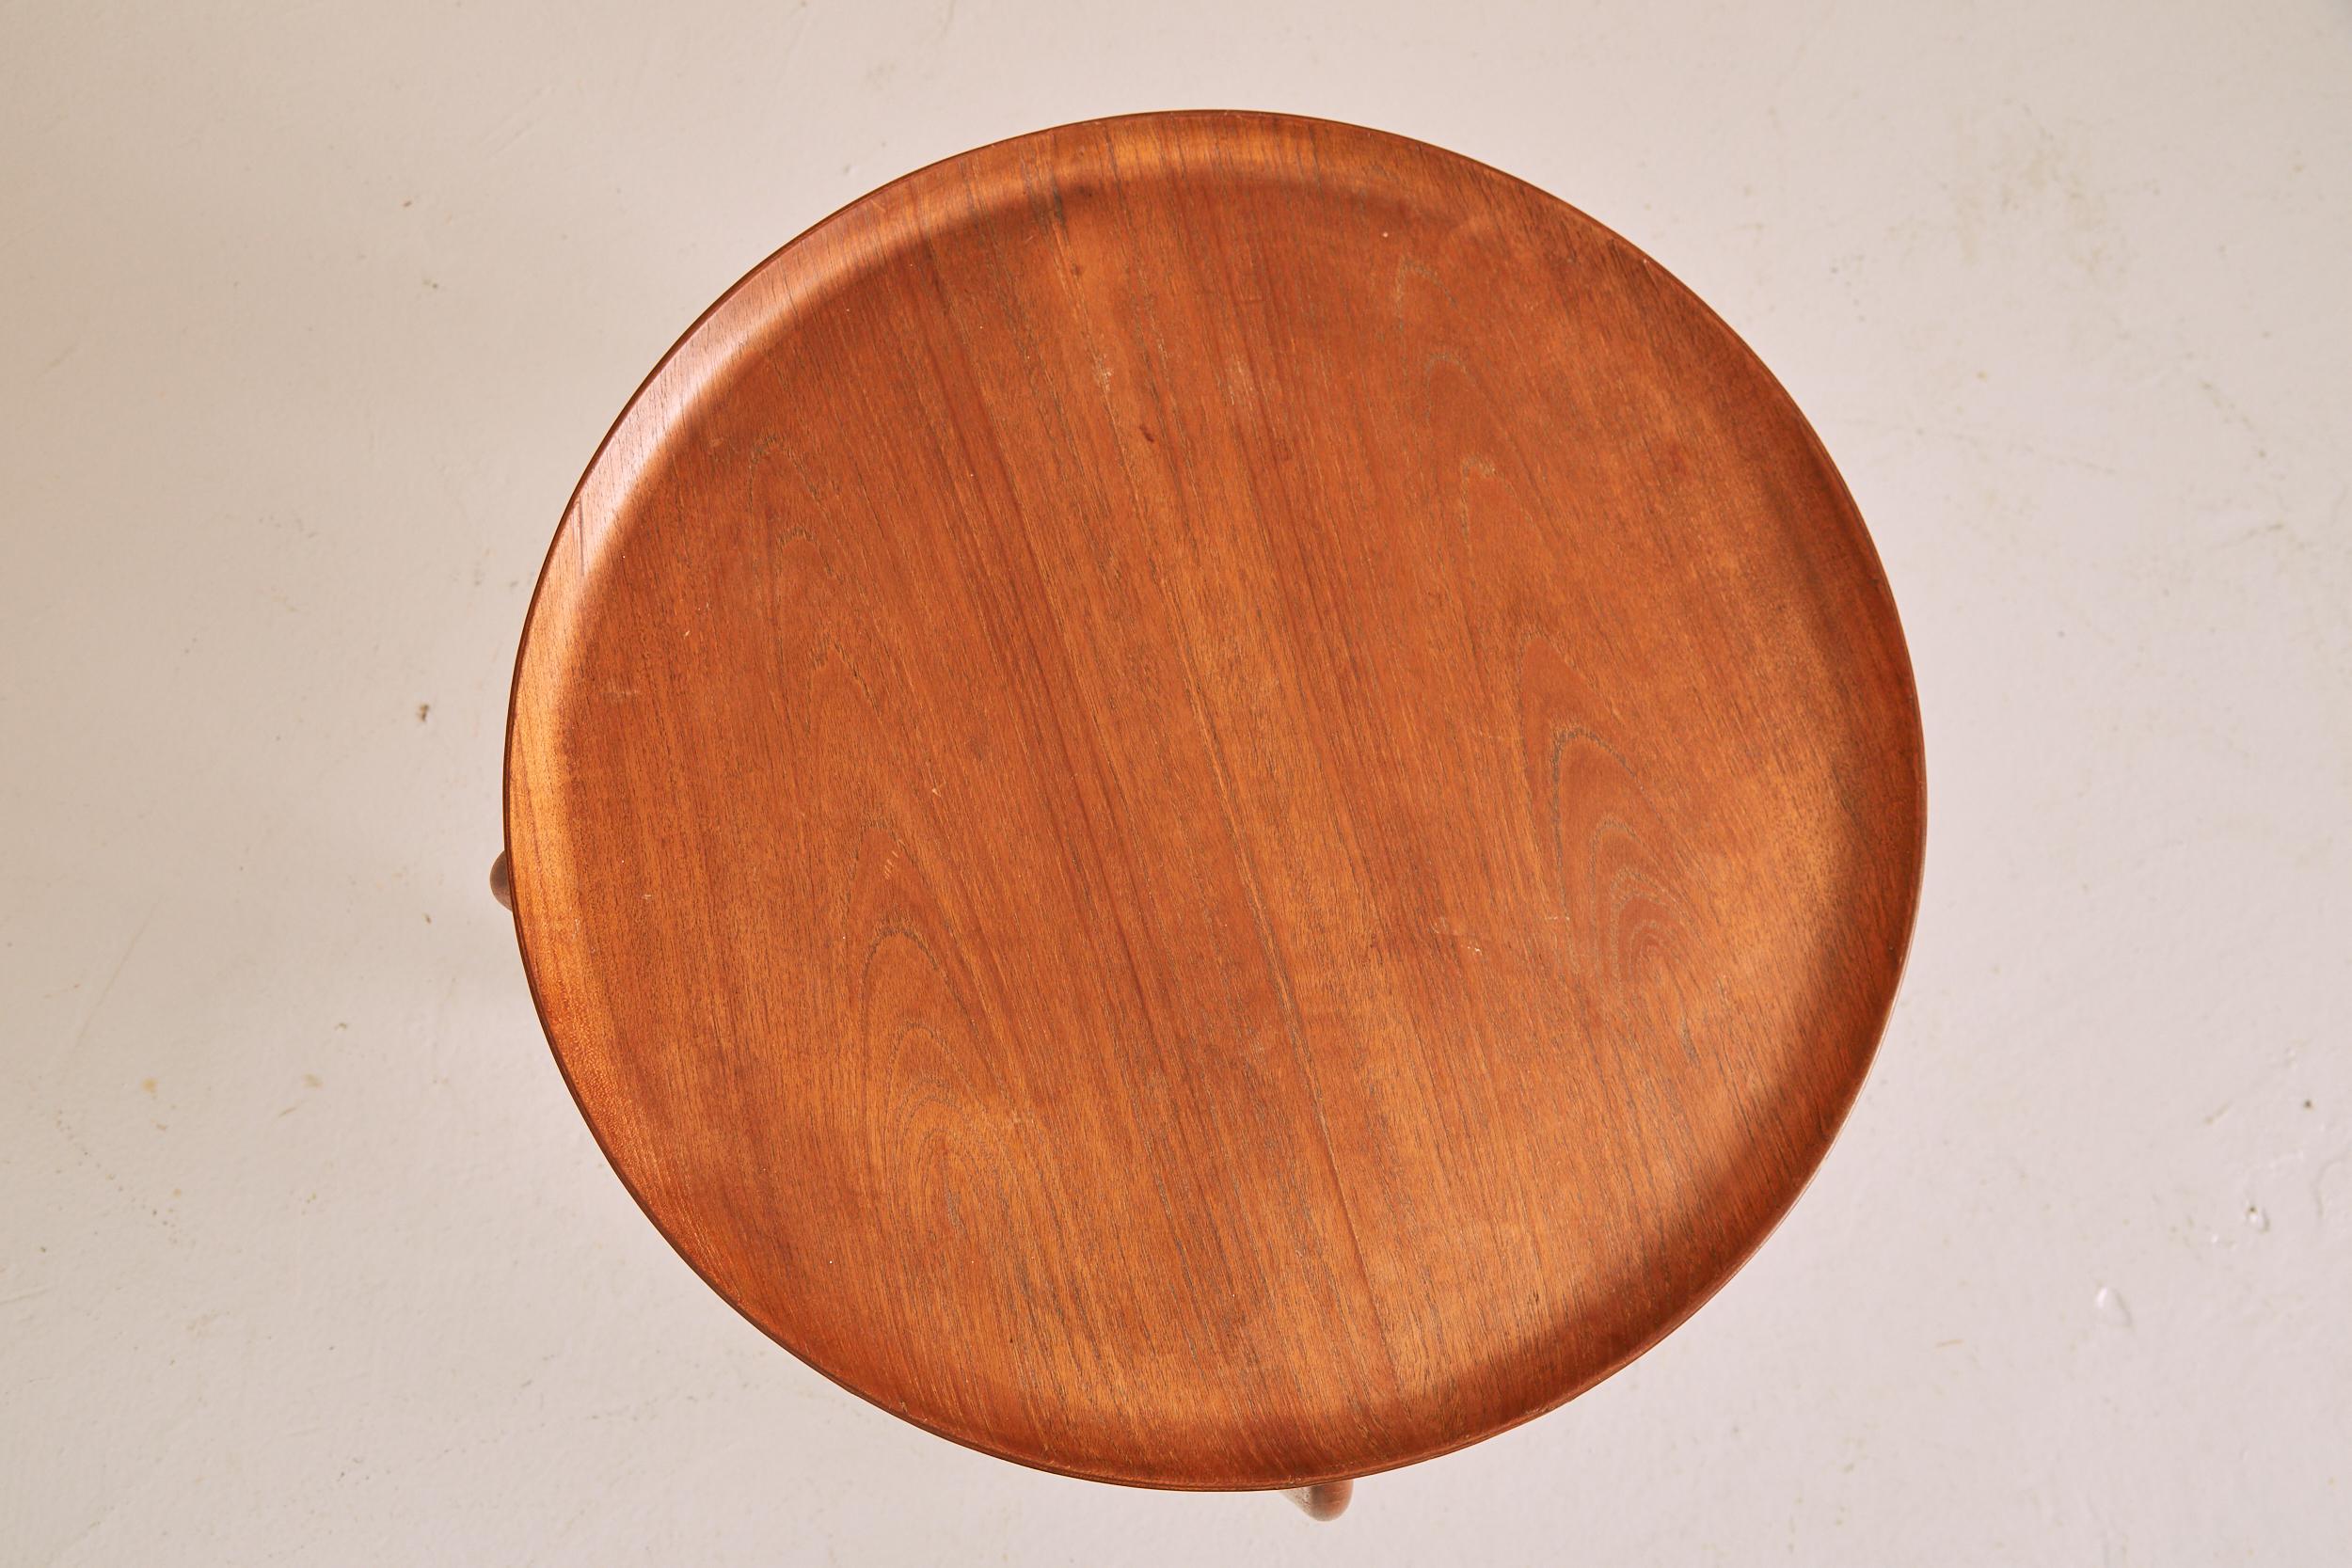 Vintage Danish Teak Side Table, Engholm & Willumsen For Fritz Hansen, 1950s In Good Condition For Sale In London, GB